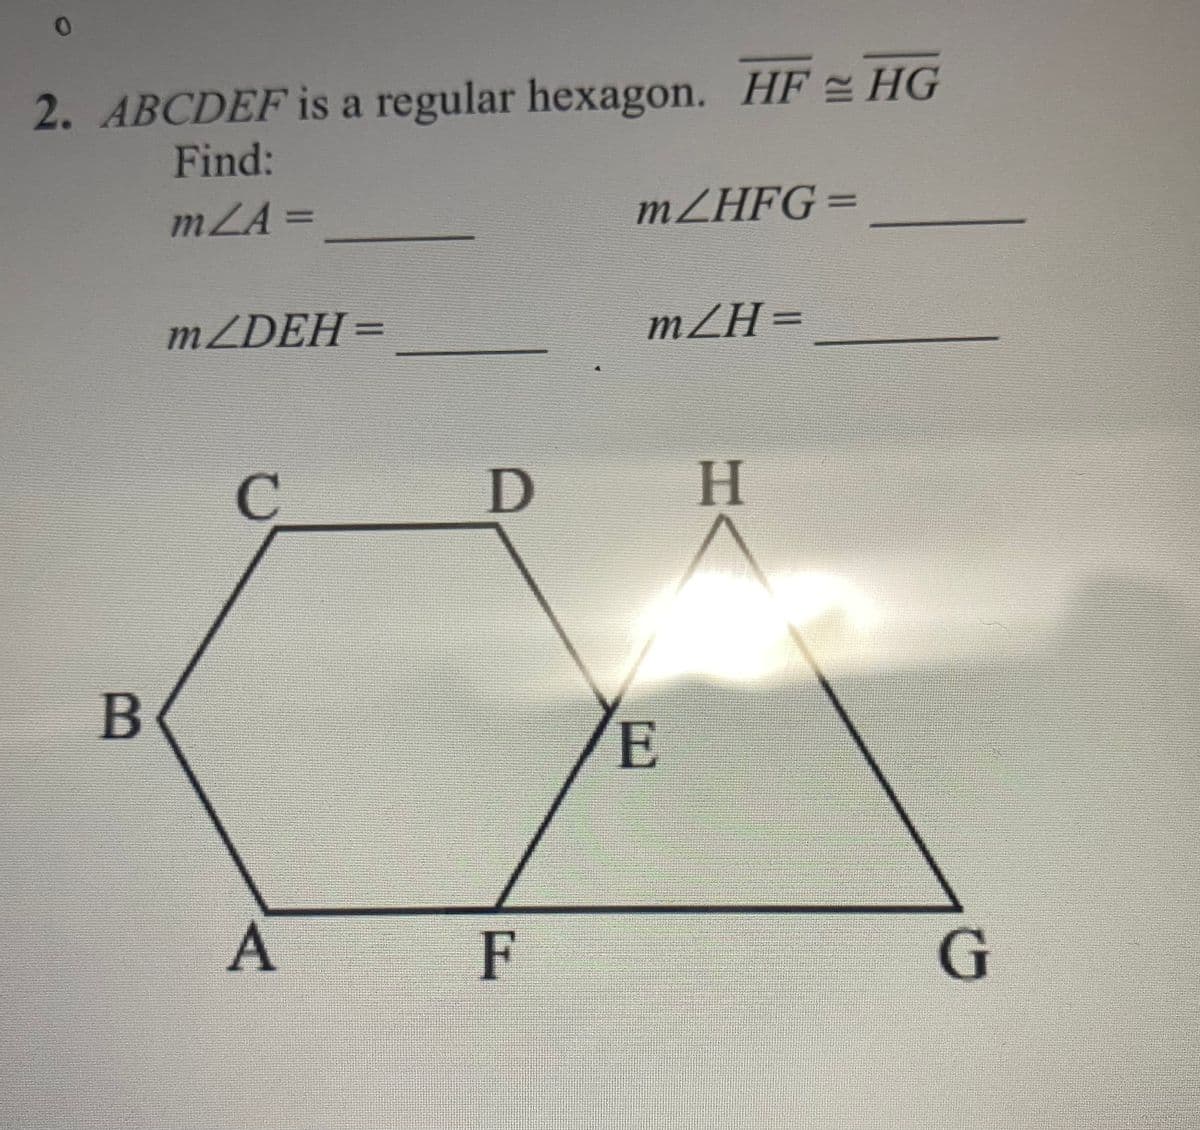 2. ABCDEF is a regular hexagon. HF HG
Find:
mZA =
MZHFG=
MZDEH=
mZH=
C.
D
H.
E
A
F
